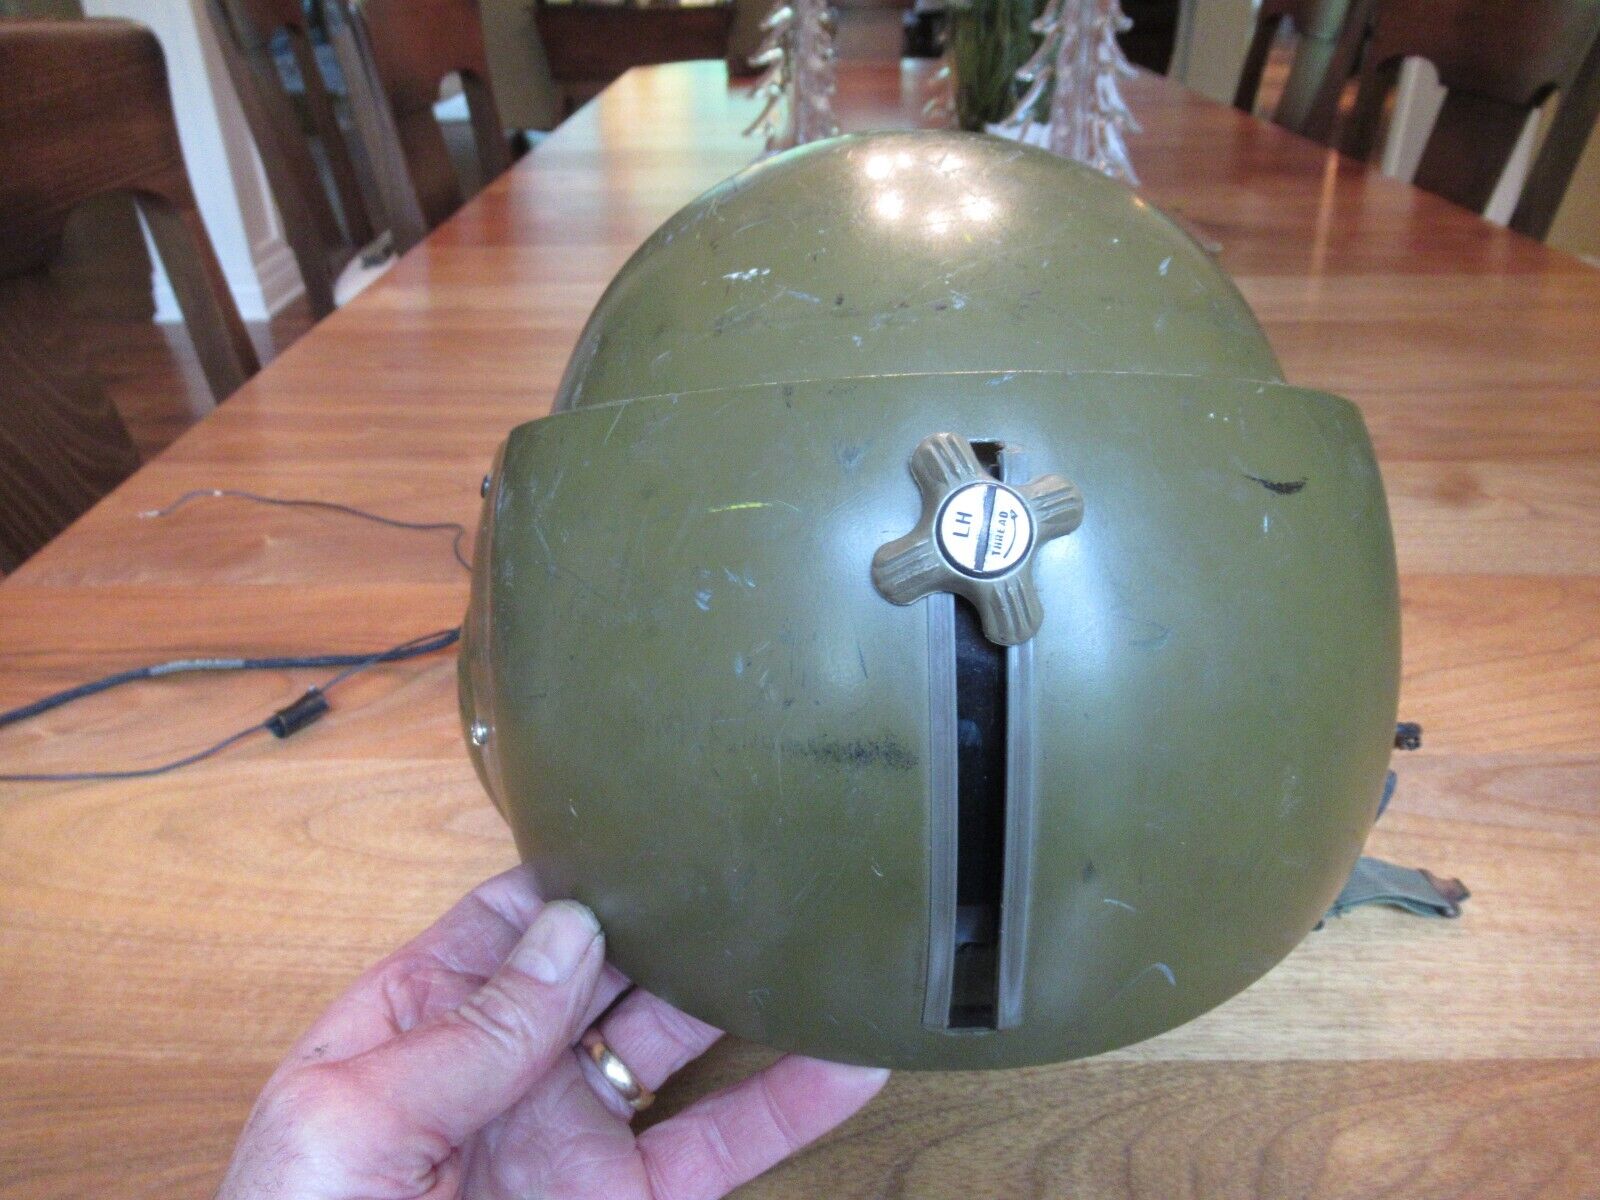 US Army Vietnam War Era Helicopter Pilot Helmet with Insignia